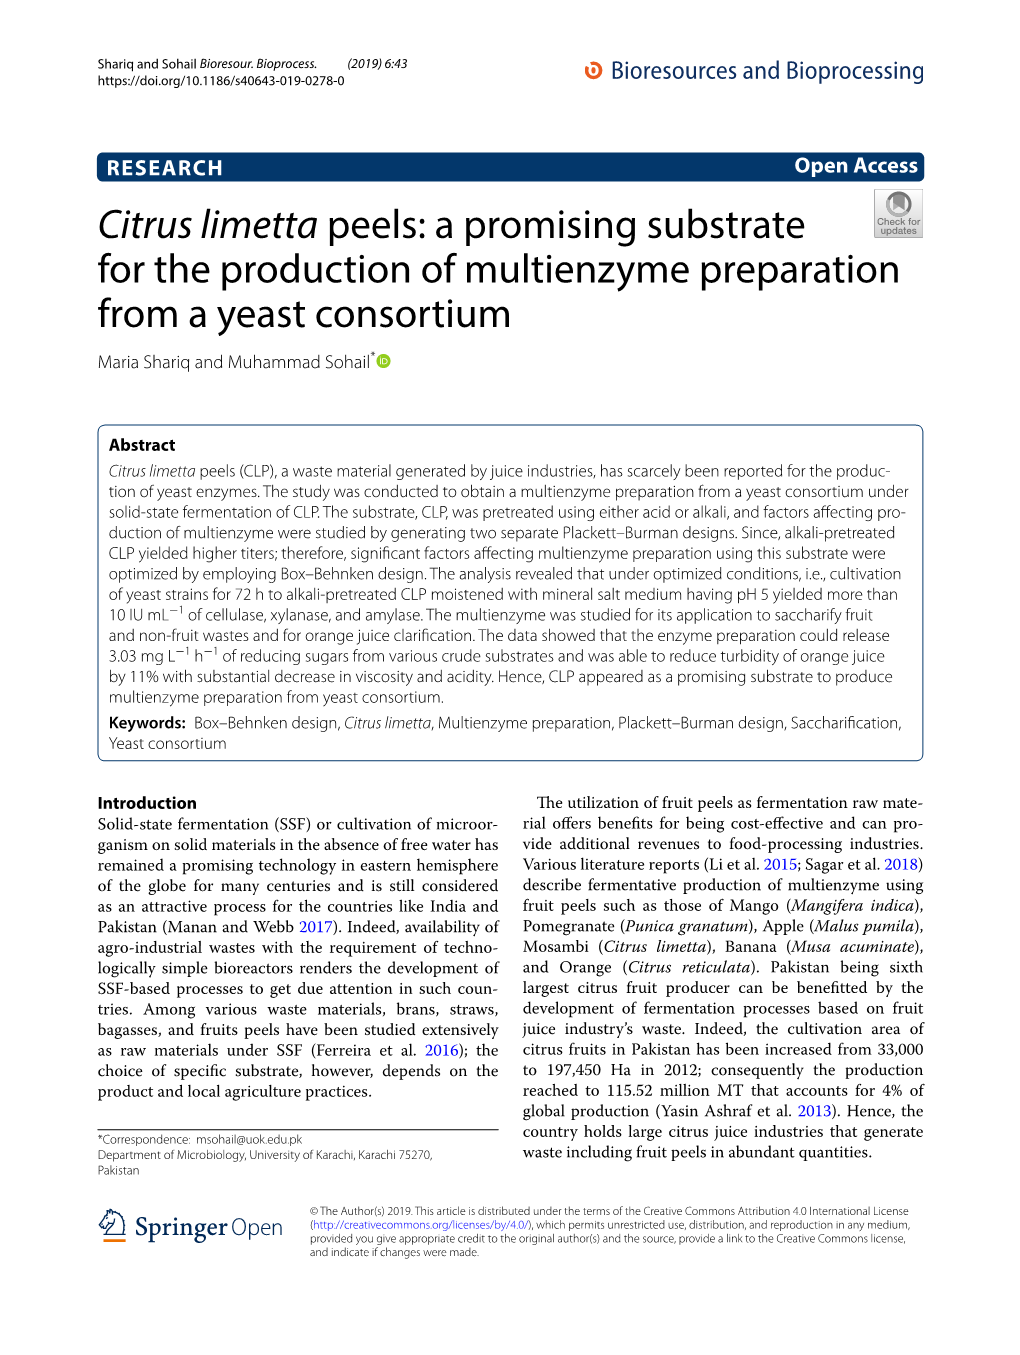 Citrus Limetta Peels: a Promising Substrate for the Production of Multienzyme Preparation from a Yeast Consortium Maria Shariq and Muhammad Sohail*